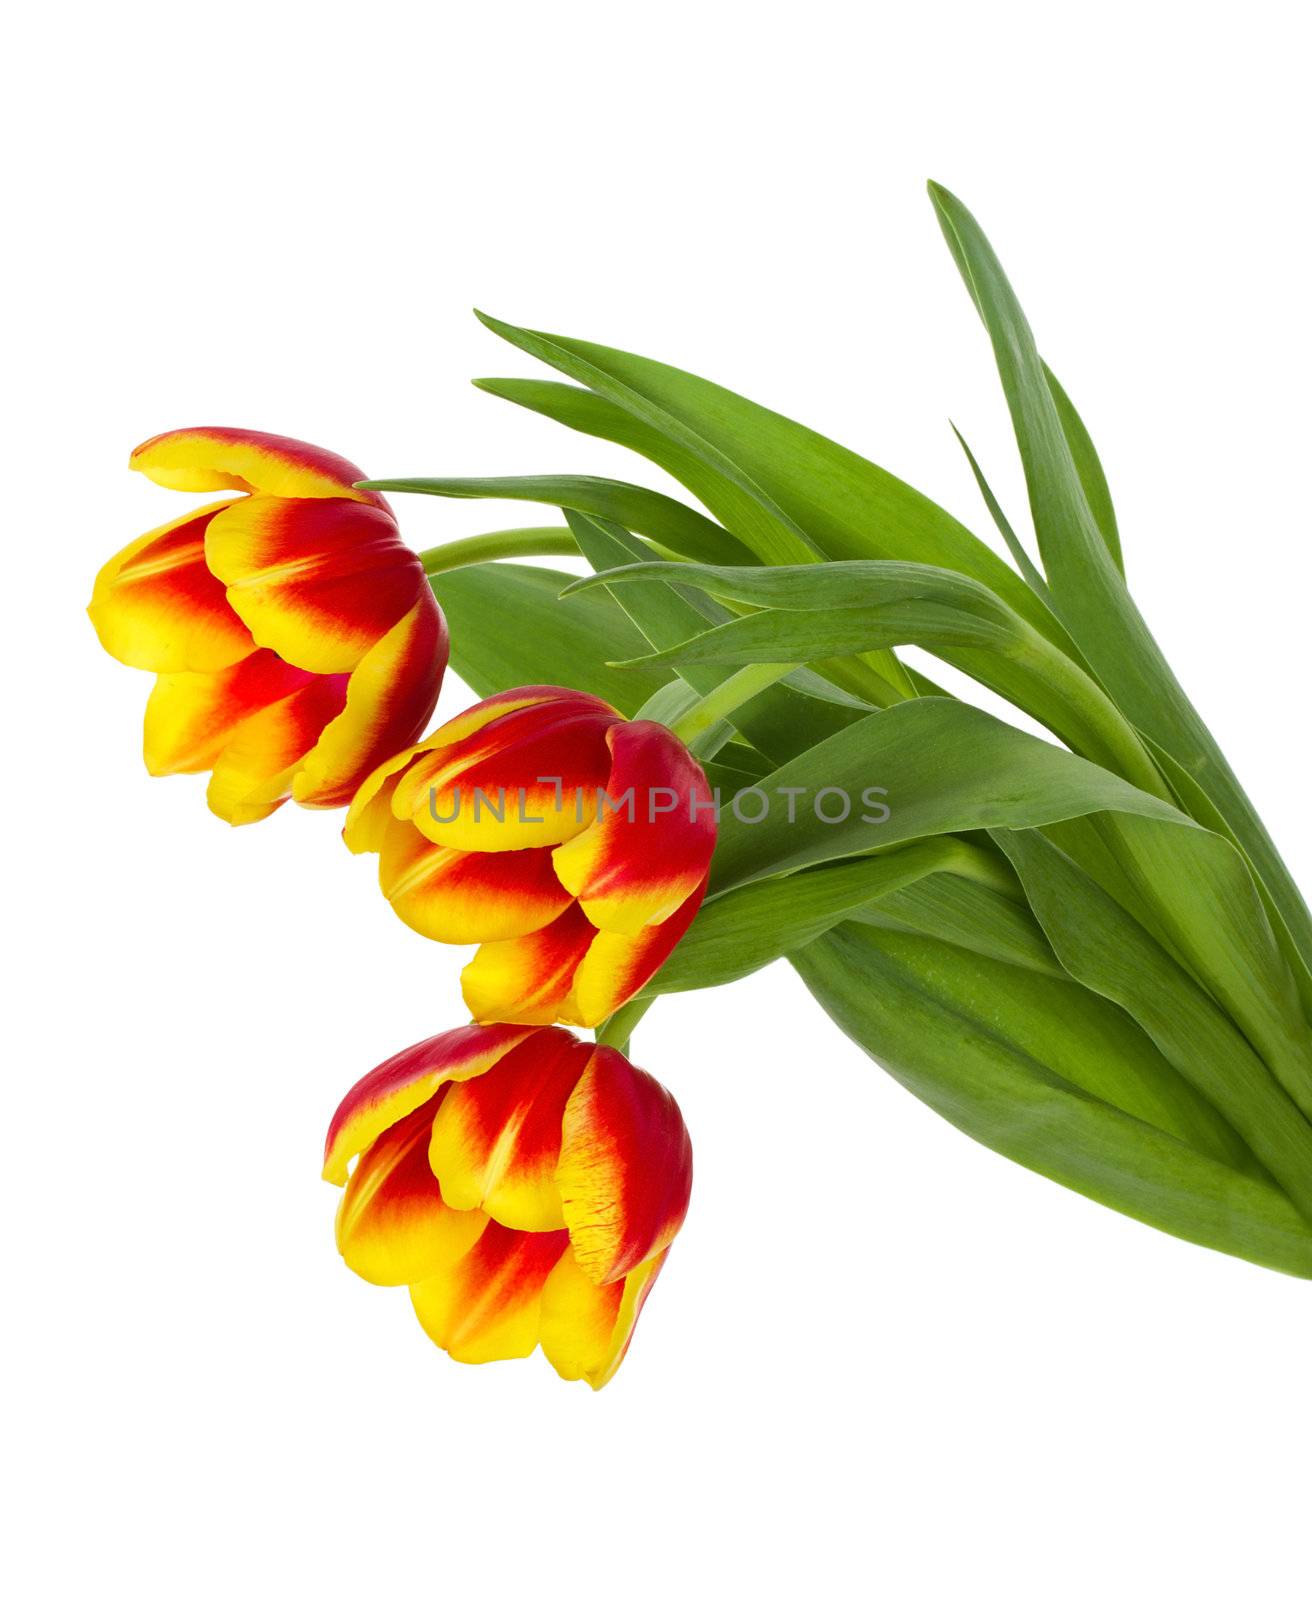 red-yellow tulips bouquet by Alekcey